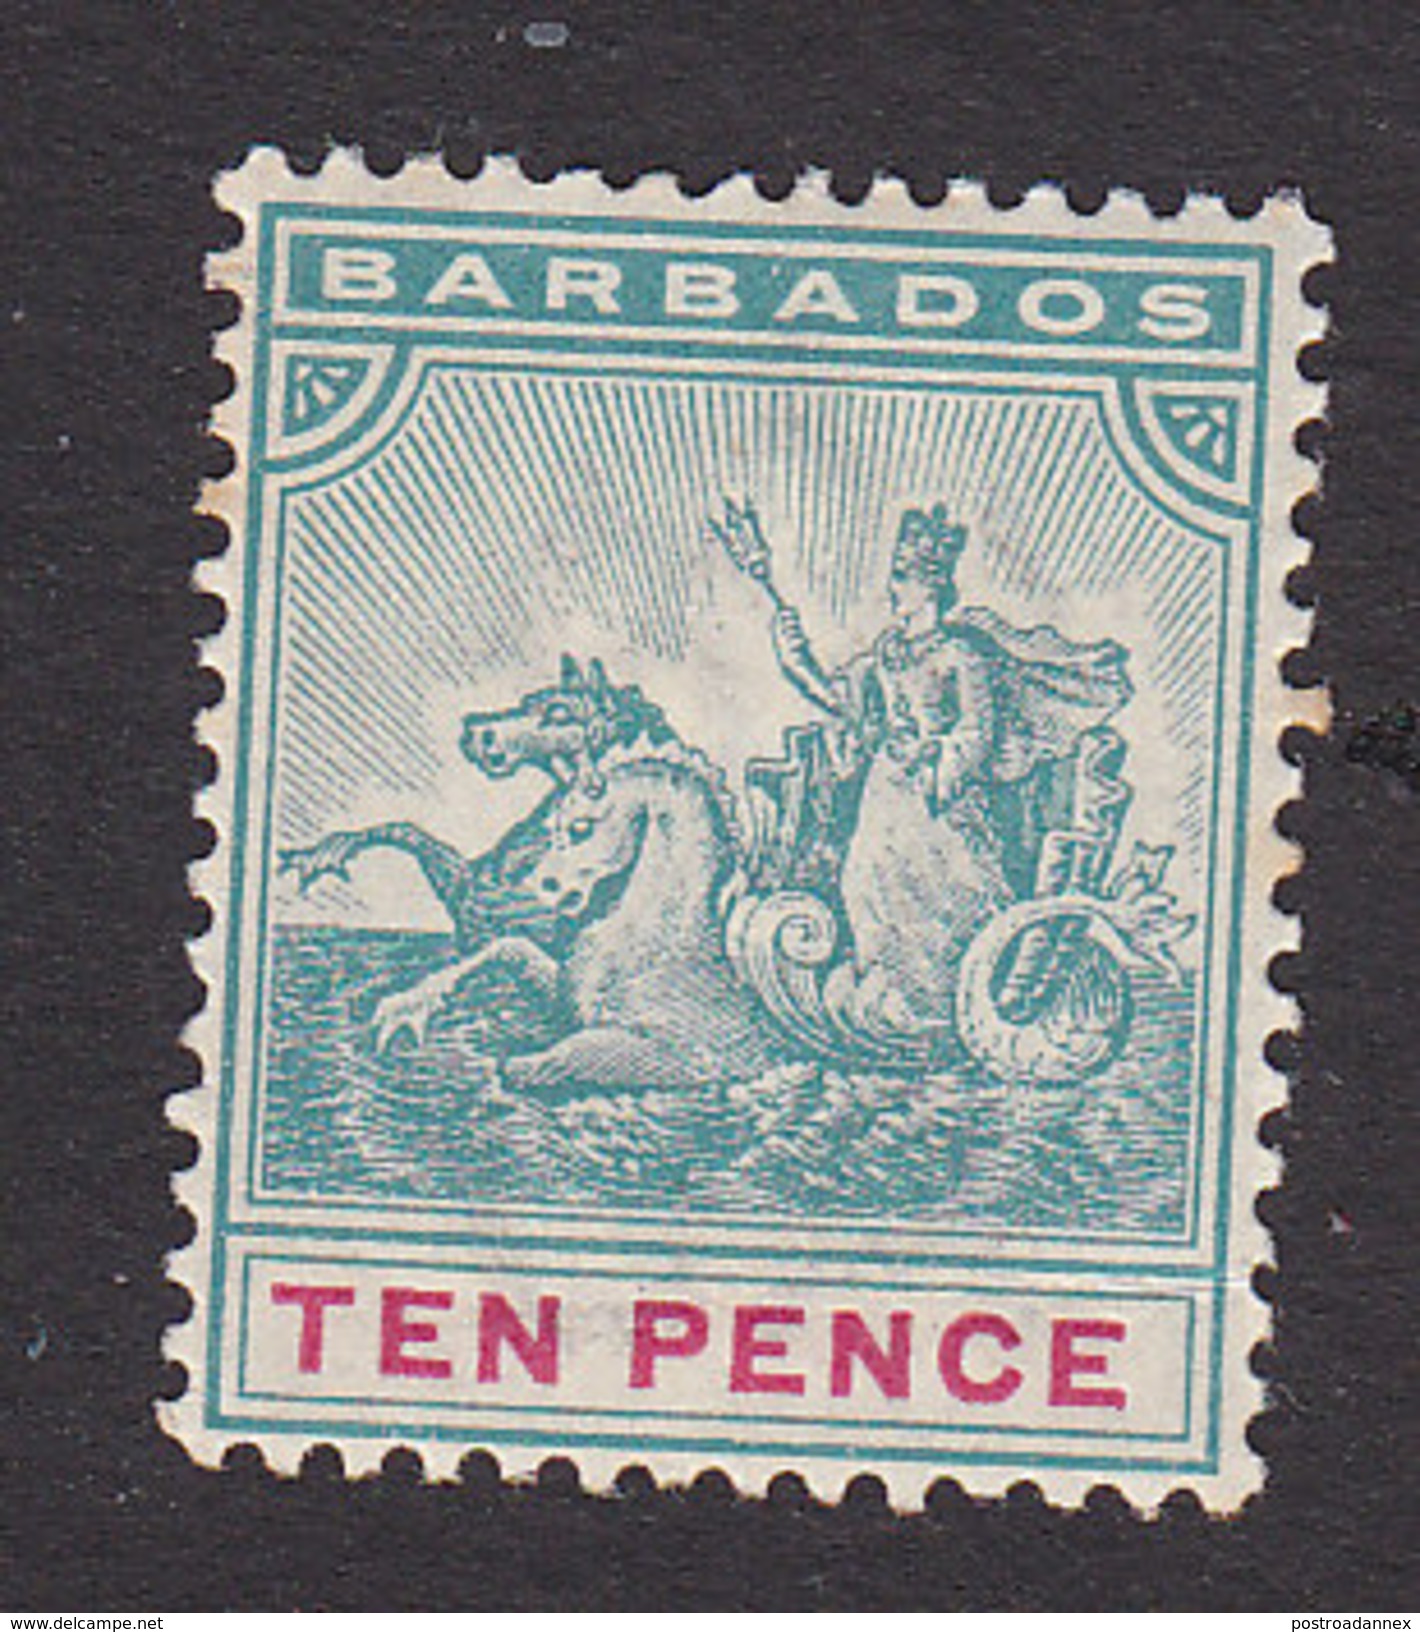 Barbados, Scott #78, Mint Hinged, Badge Of The Colony, Issued 1892 - Barbados (...-1966)